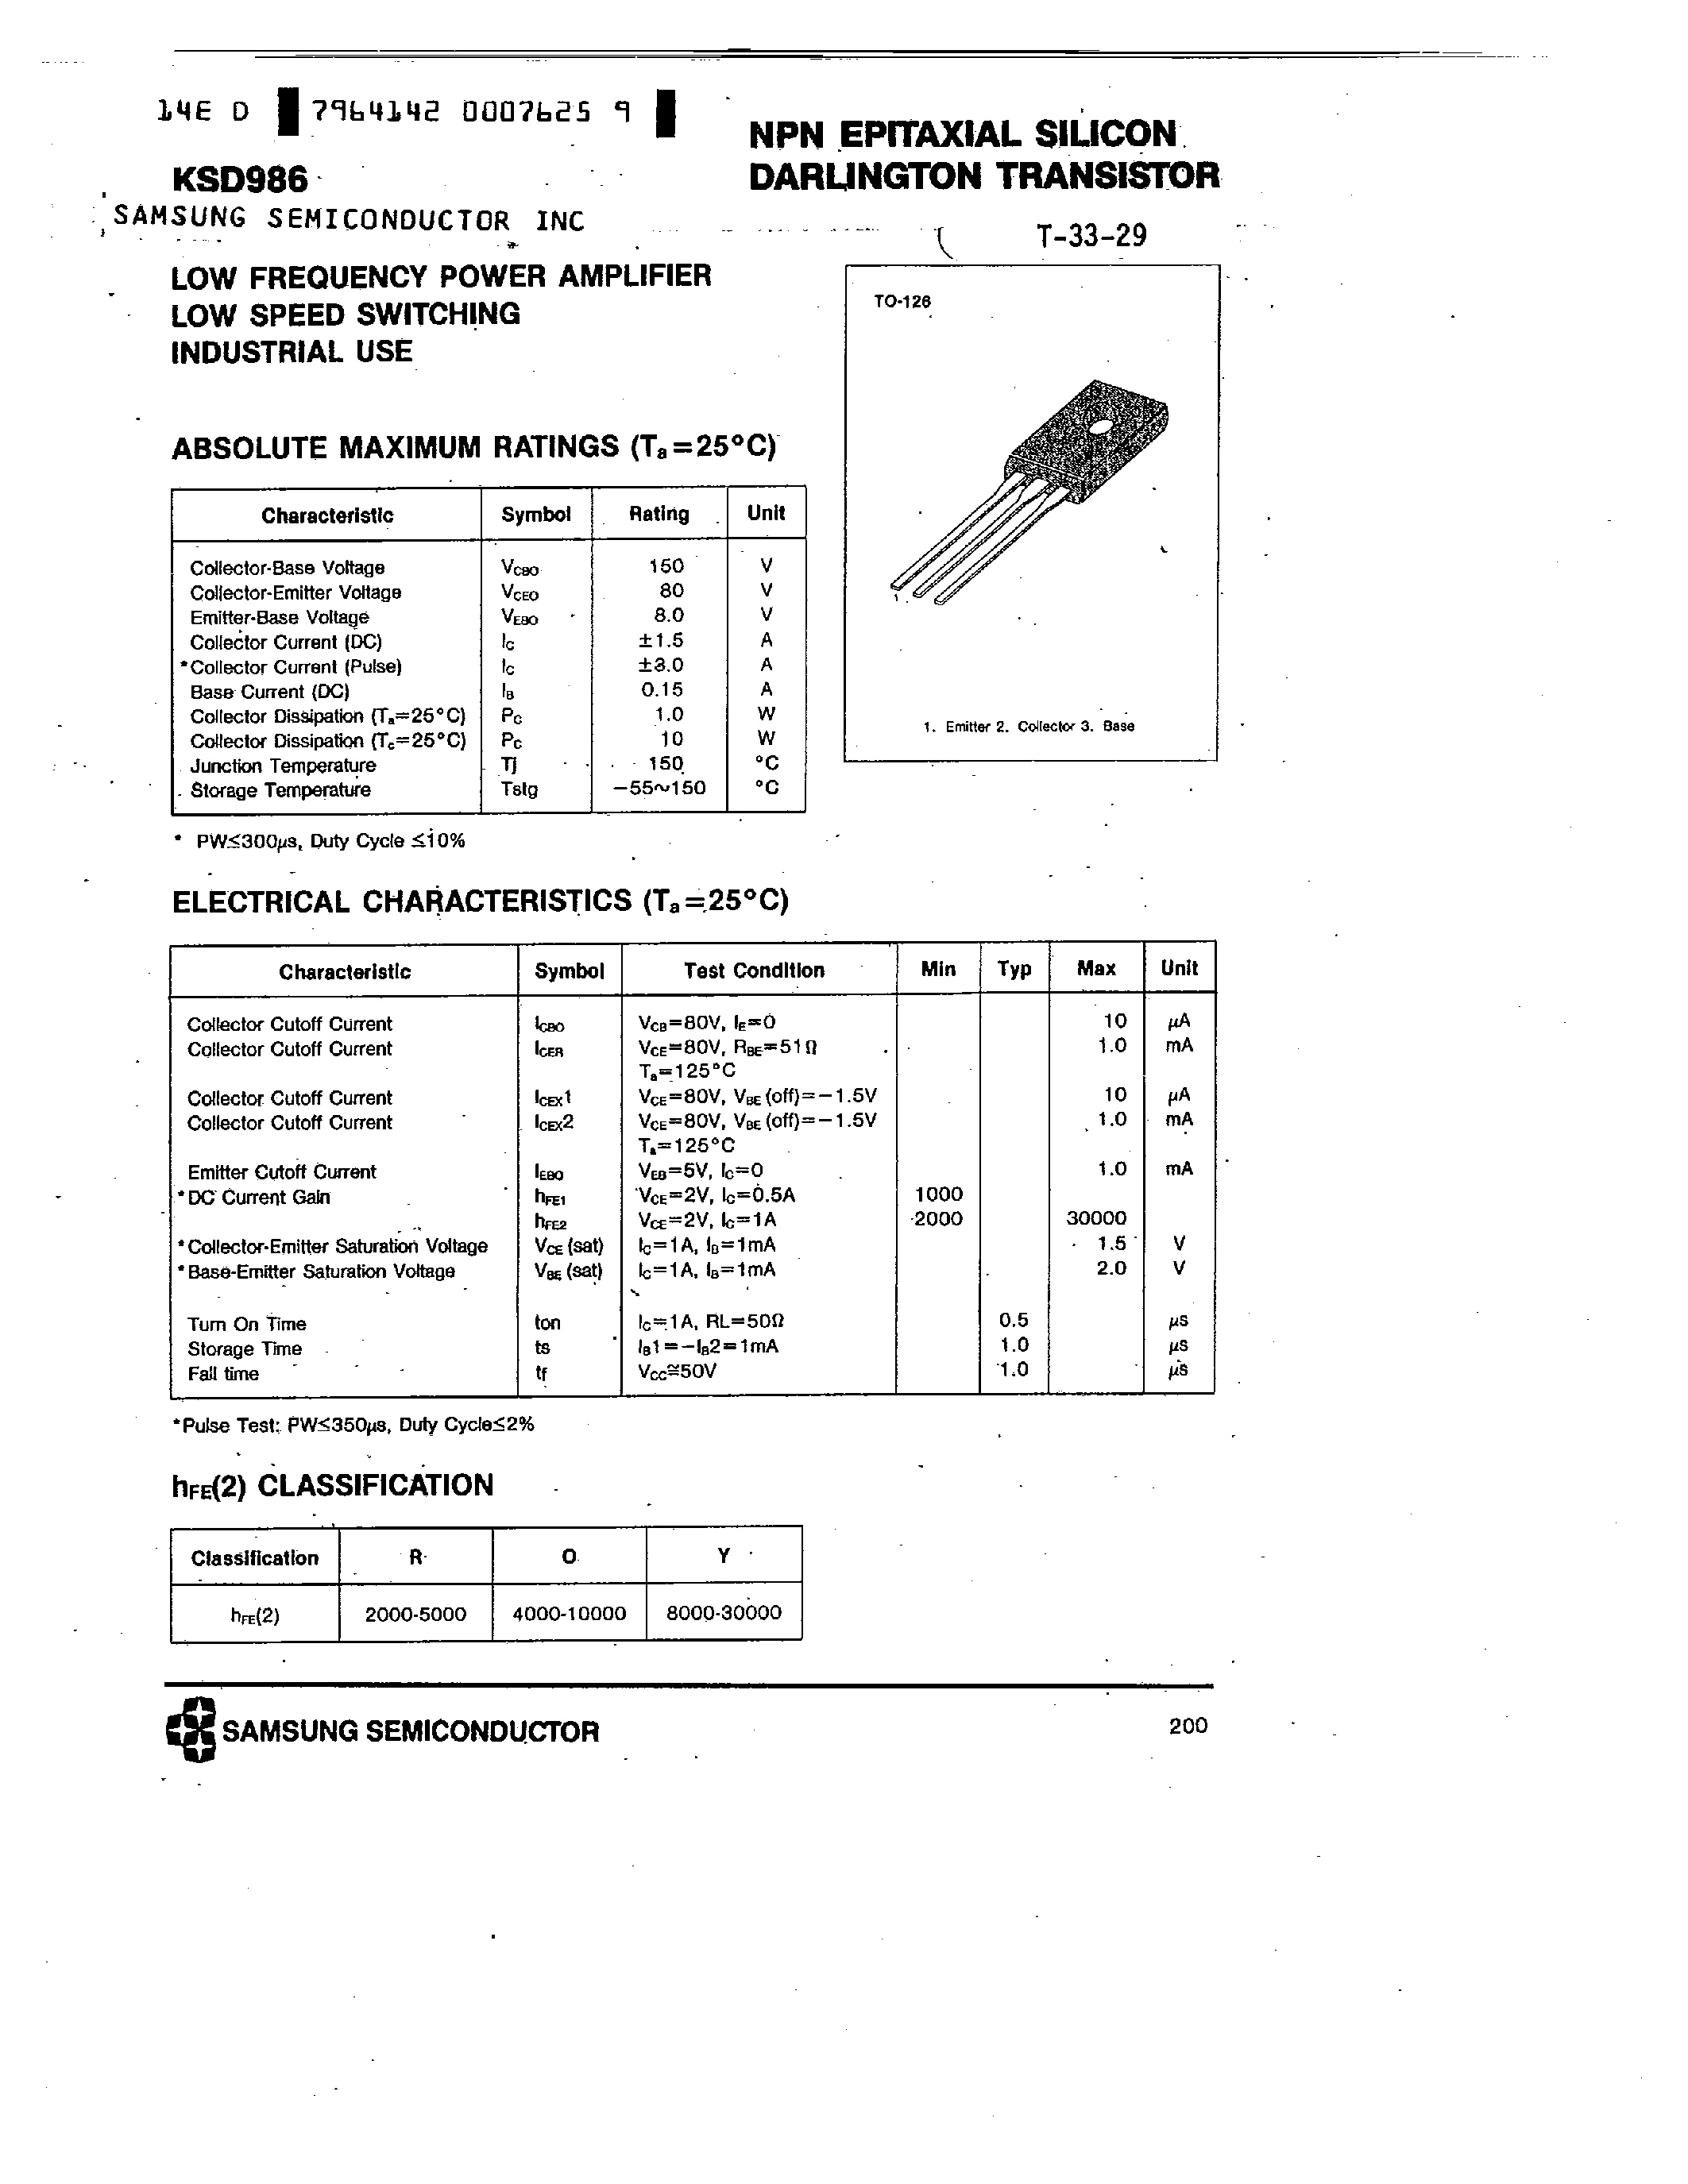 Datasheet KSD986 - NPN (LOW FREQUENCY POWER AMPLIFIER LOW SPEED SWITCHING INDUSTRIAL USE) page 1